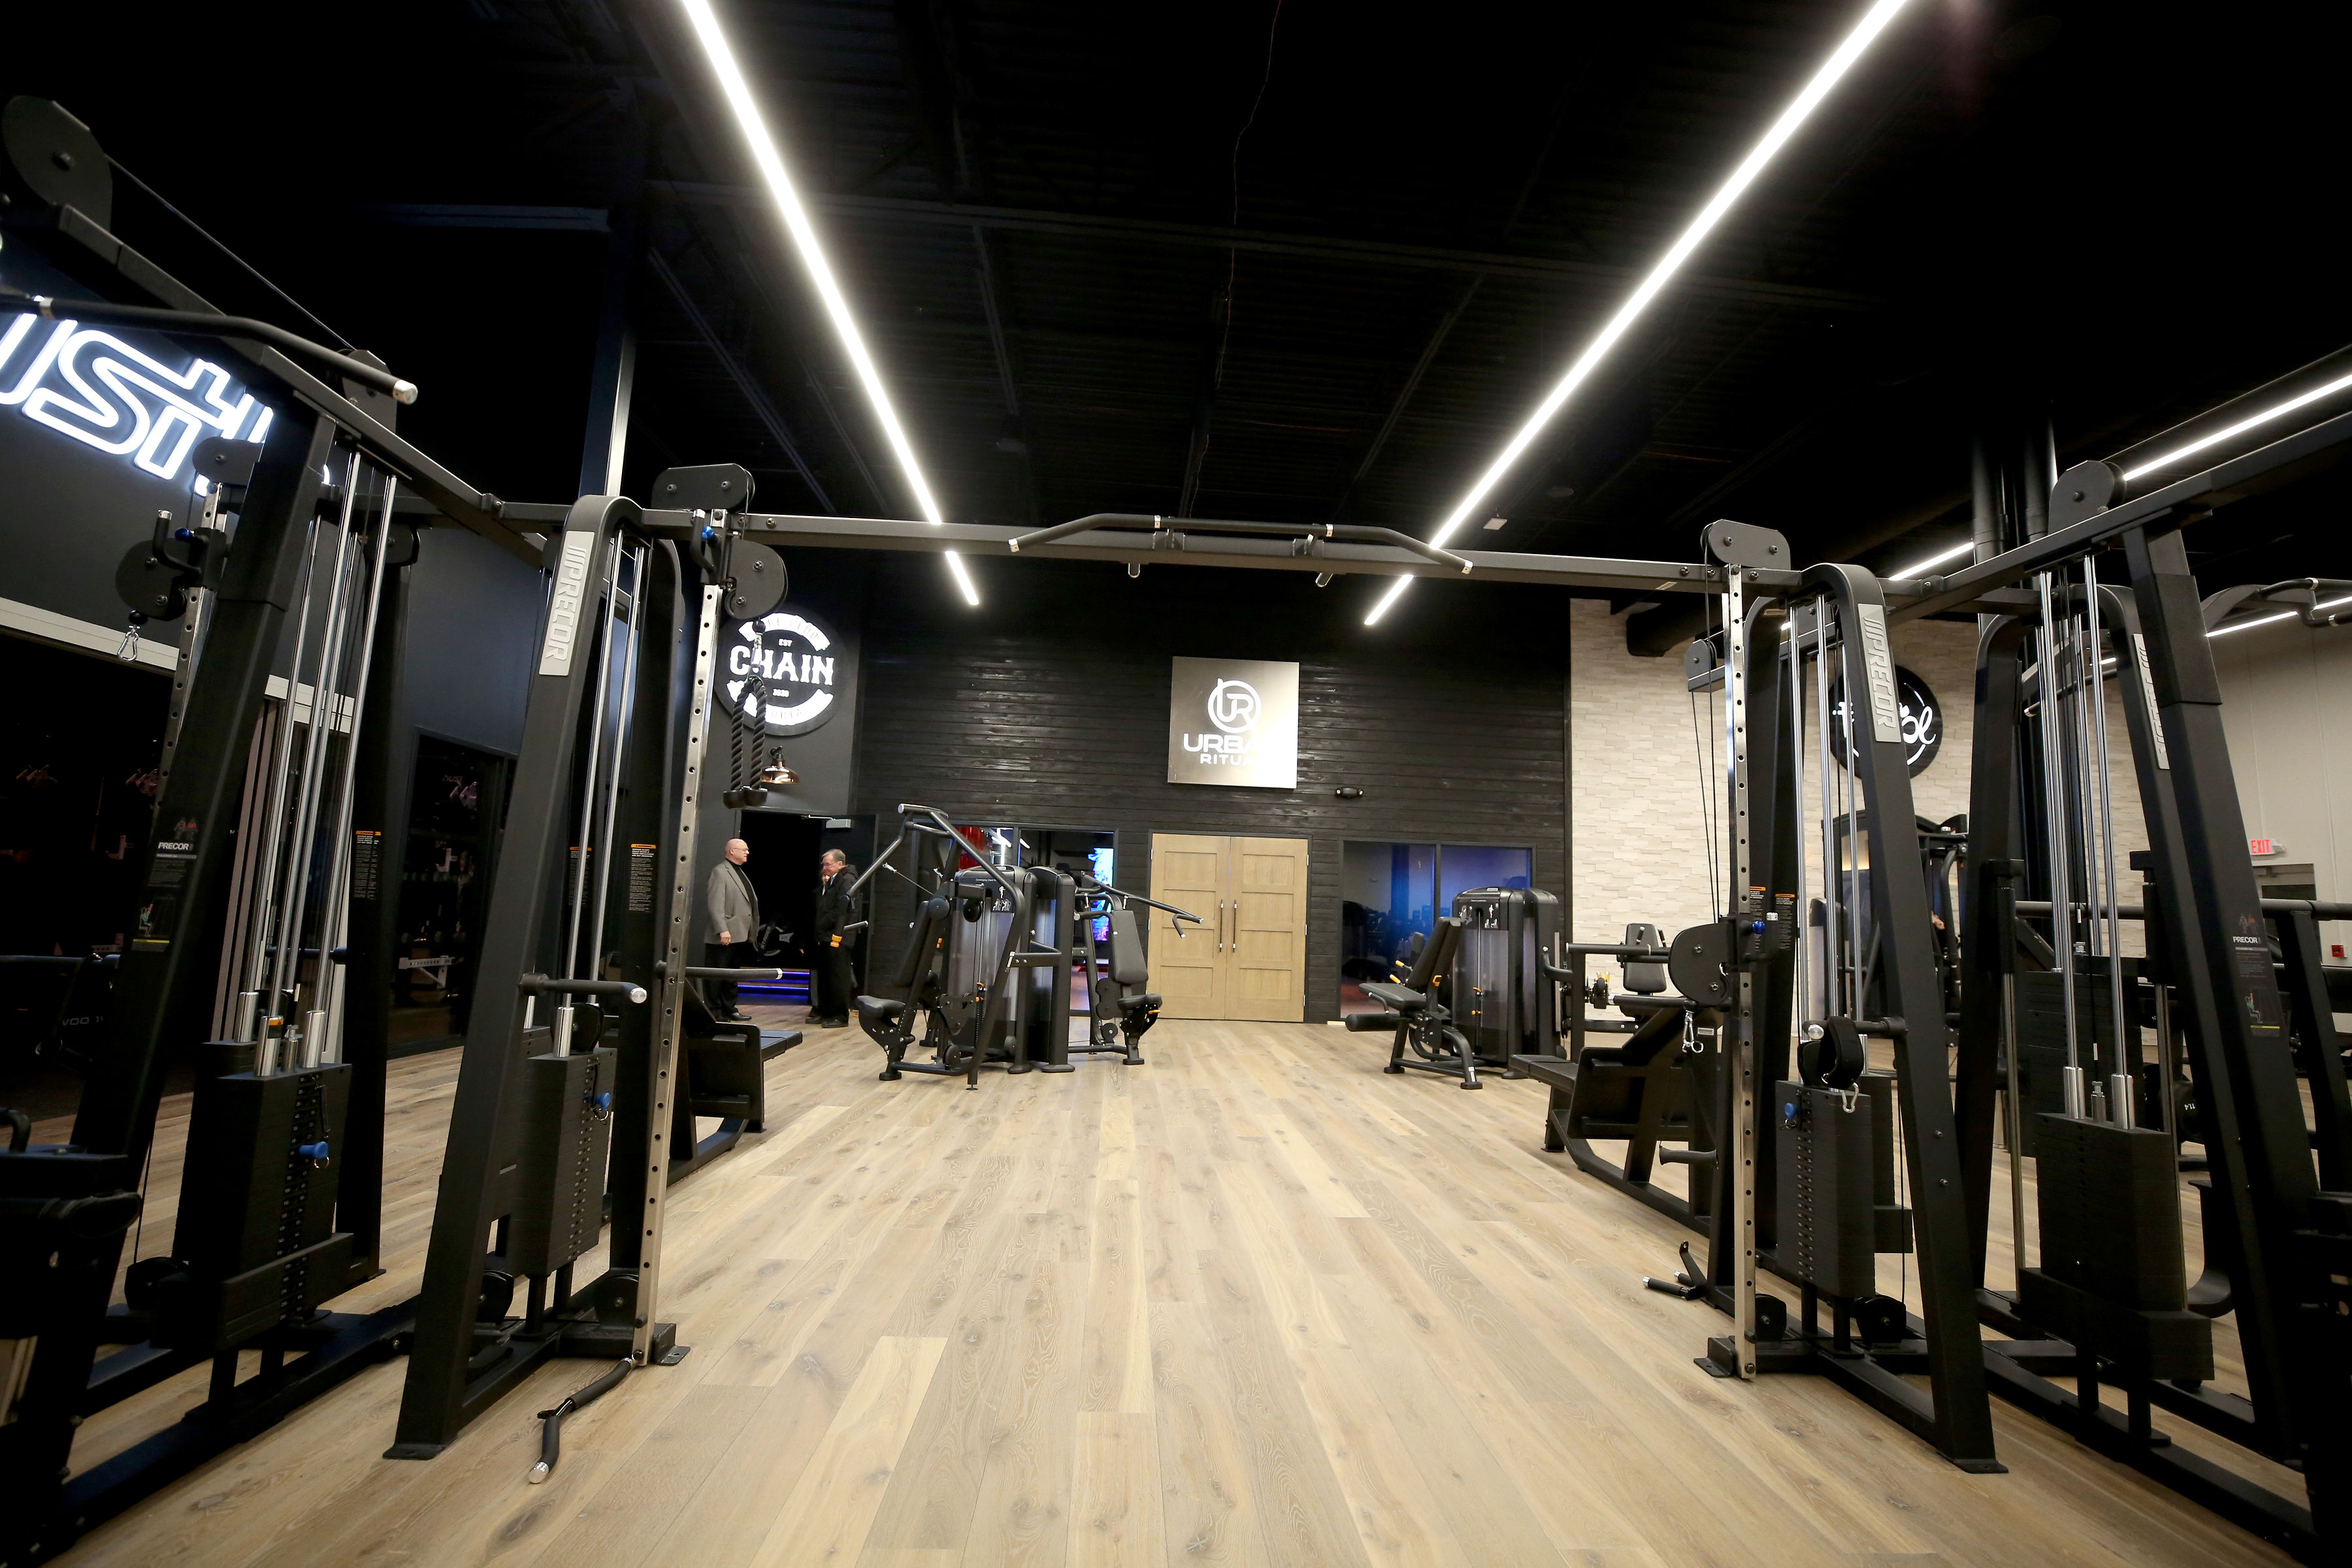 Styles Studios Fitness, a fitness club in Peoria, IL.